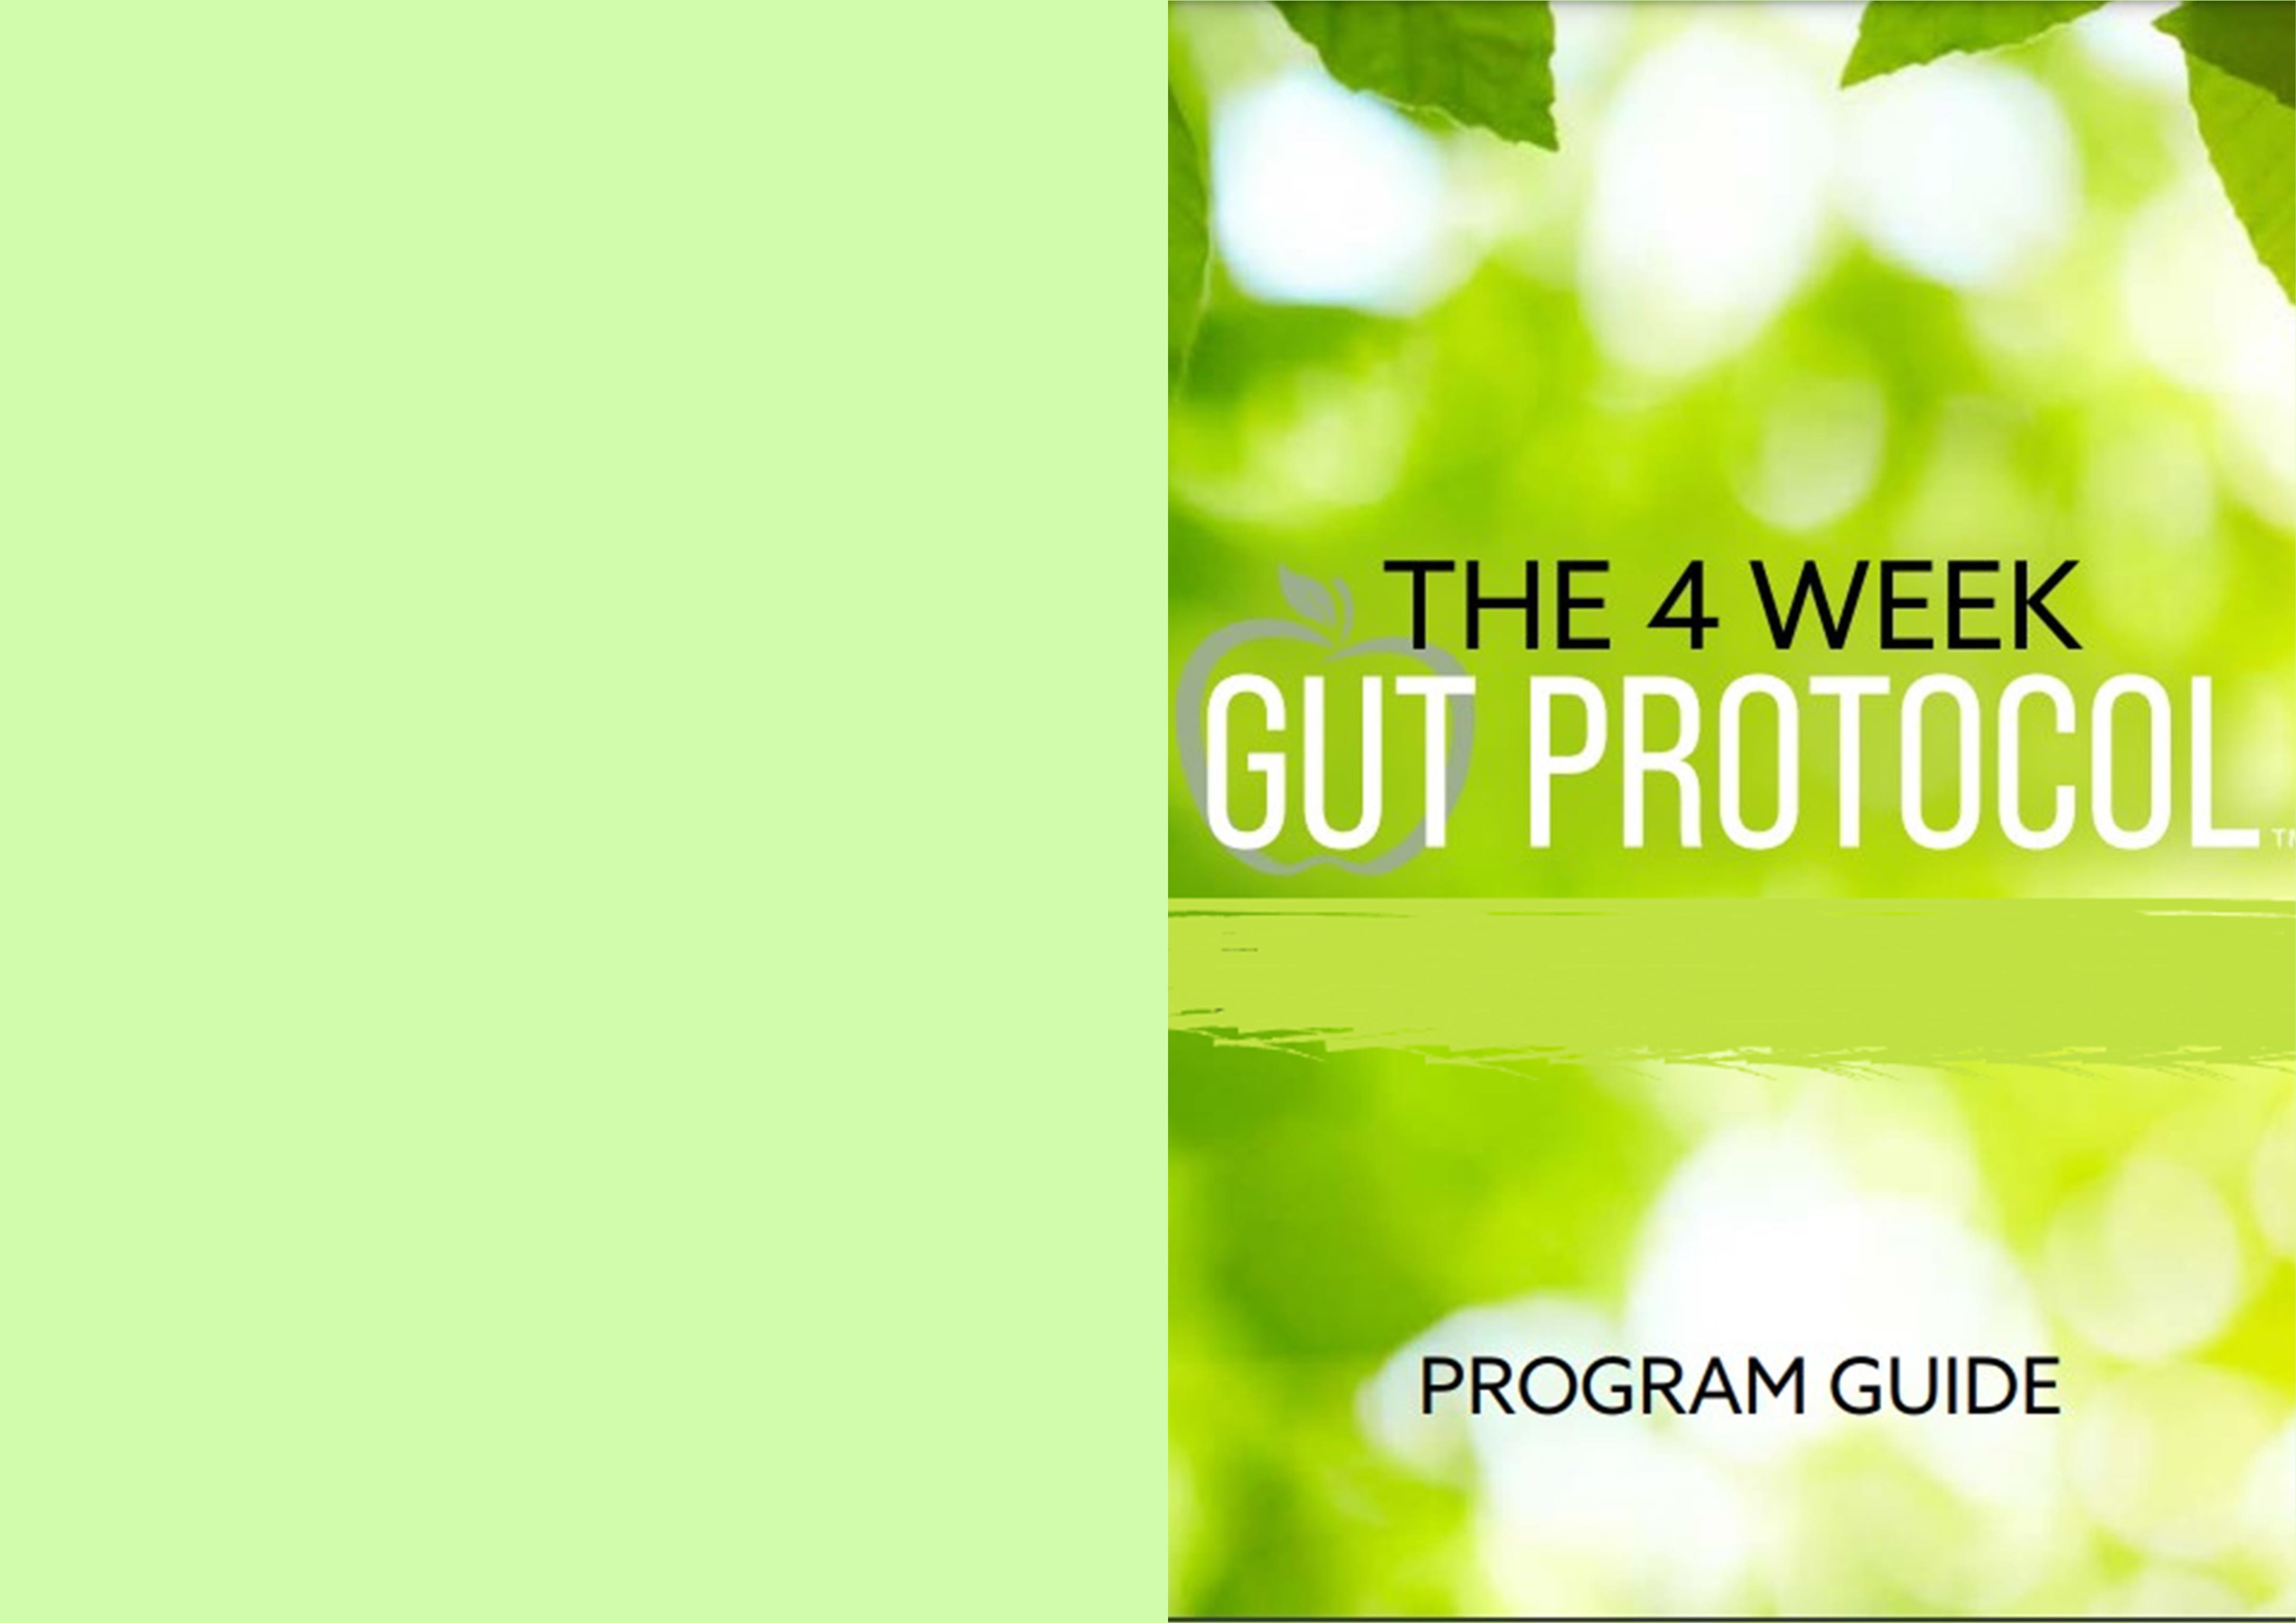 4 Week Gut Protocol cover image